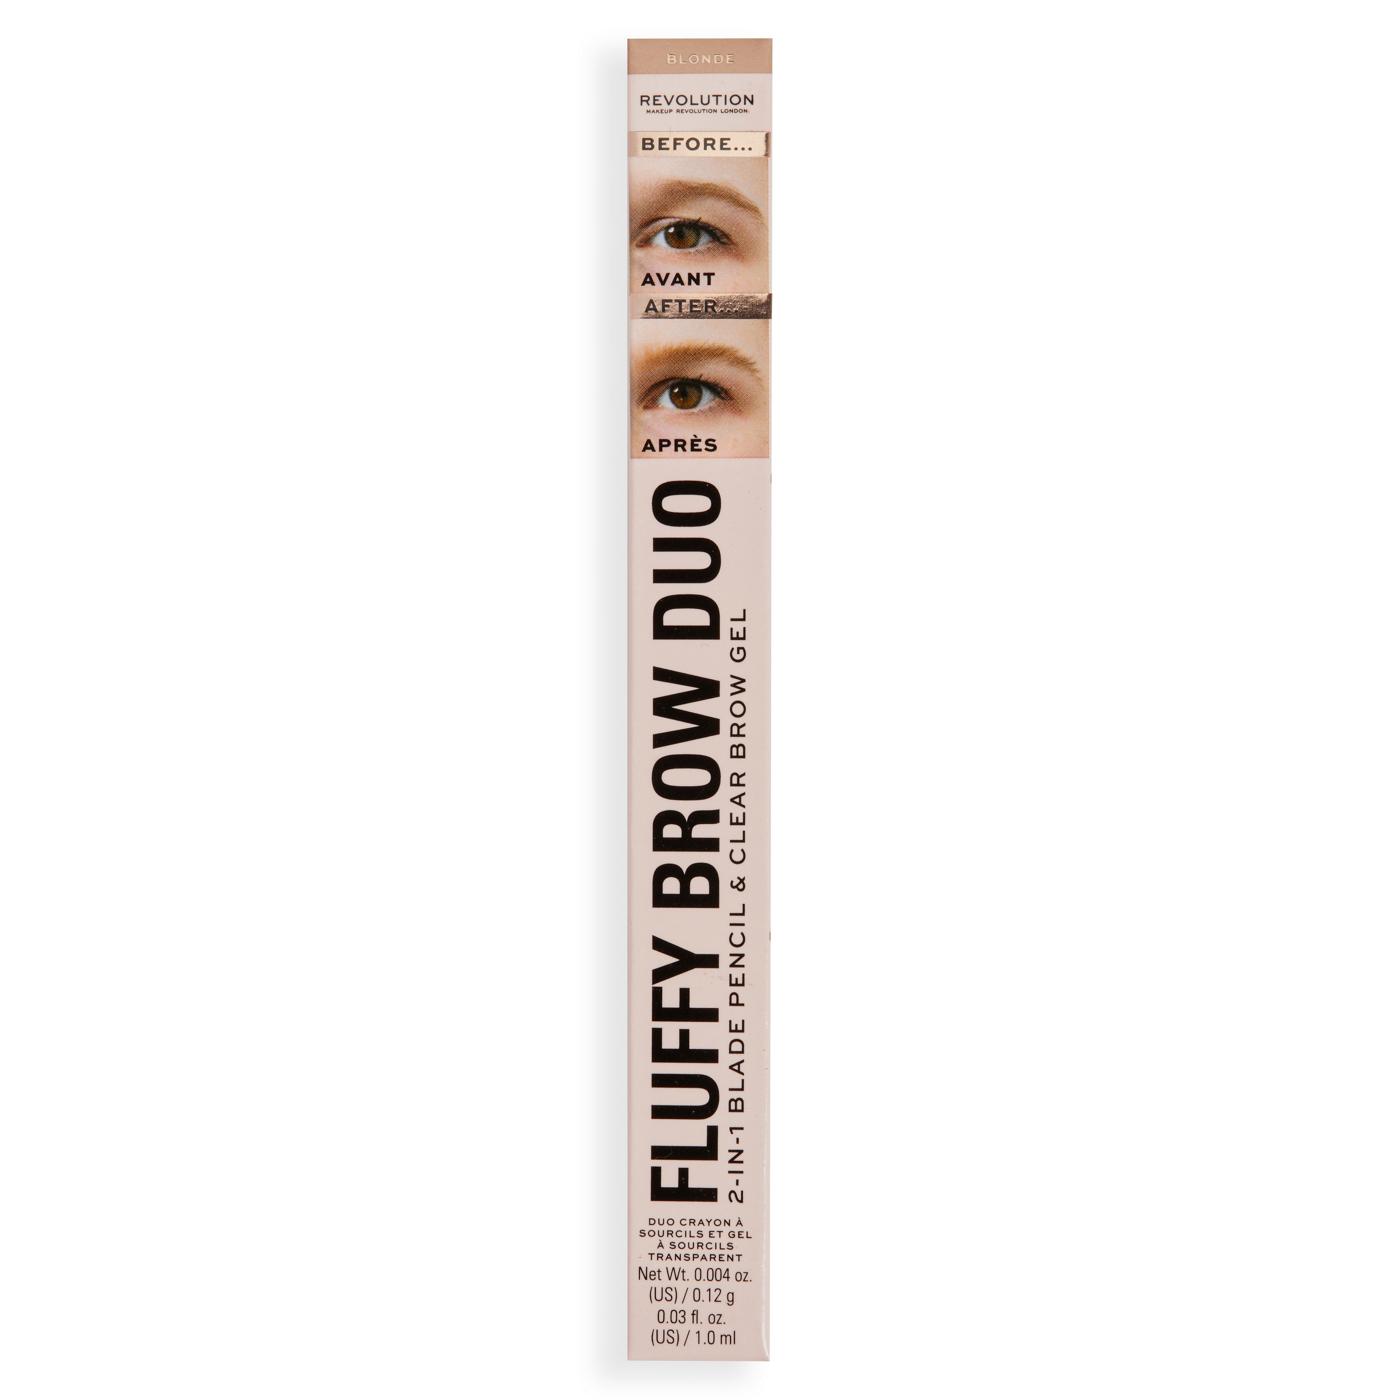 Makeup Revolution Fluffy Brow Duo Pencil - Blonde; image 1 of 4